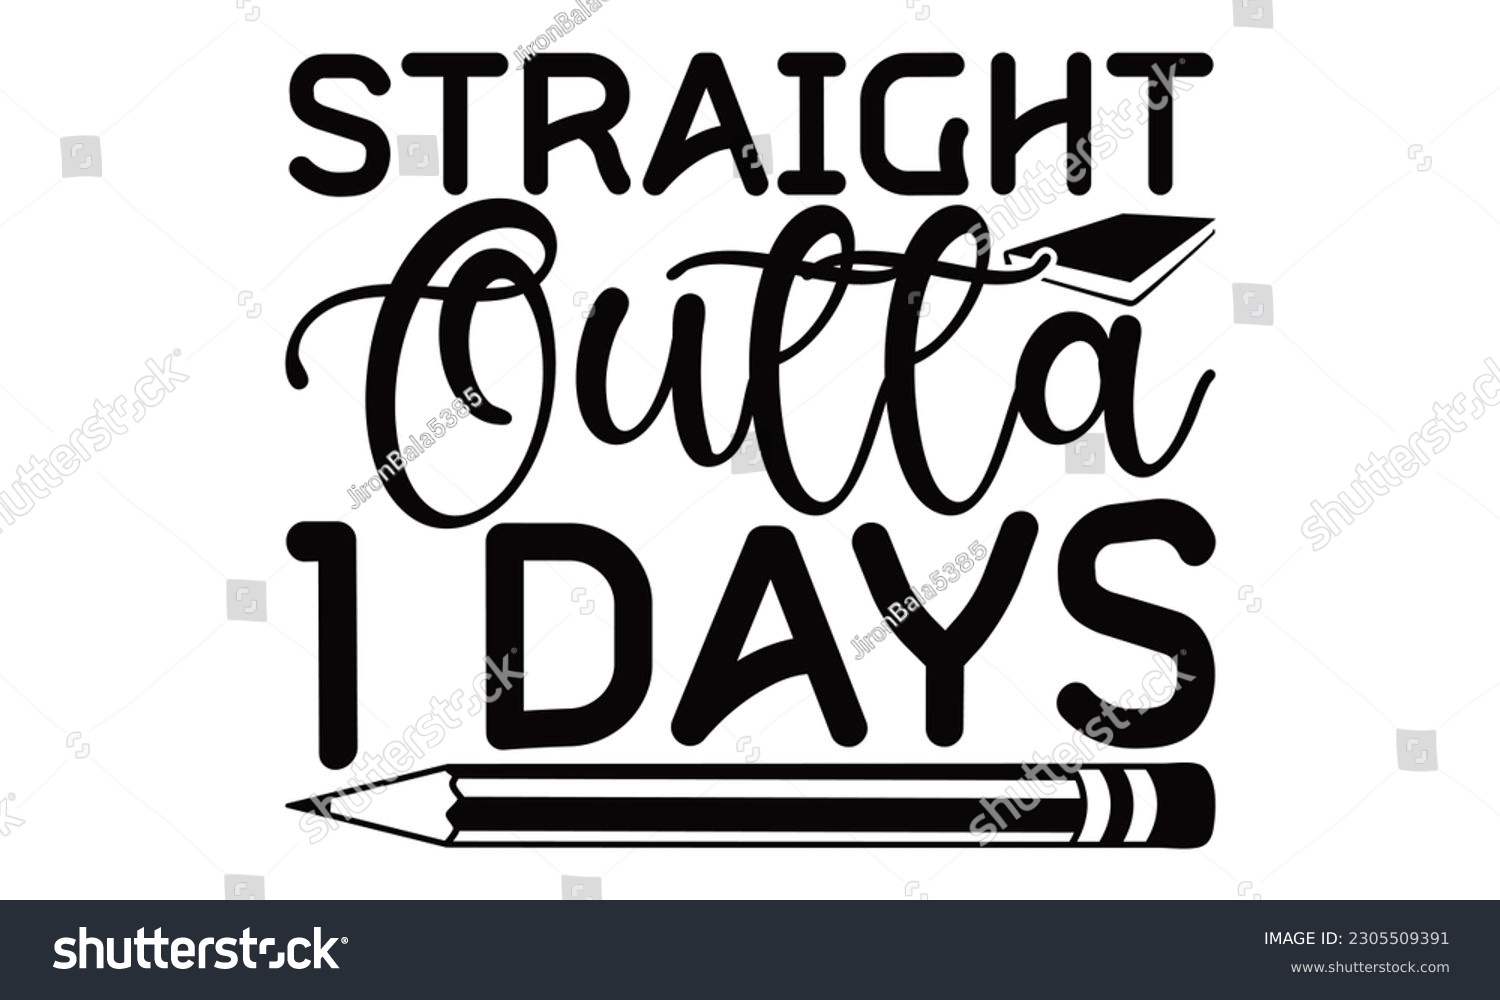 SVG of Straight Outta 1 Days - School SVG Design, Hand written vector design, Illustration for prints on T-Shirts, bags and Posters, for Cutting Machine, Cameo, Cricut. svg